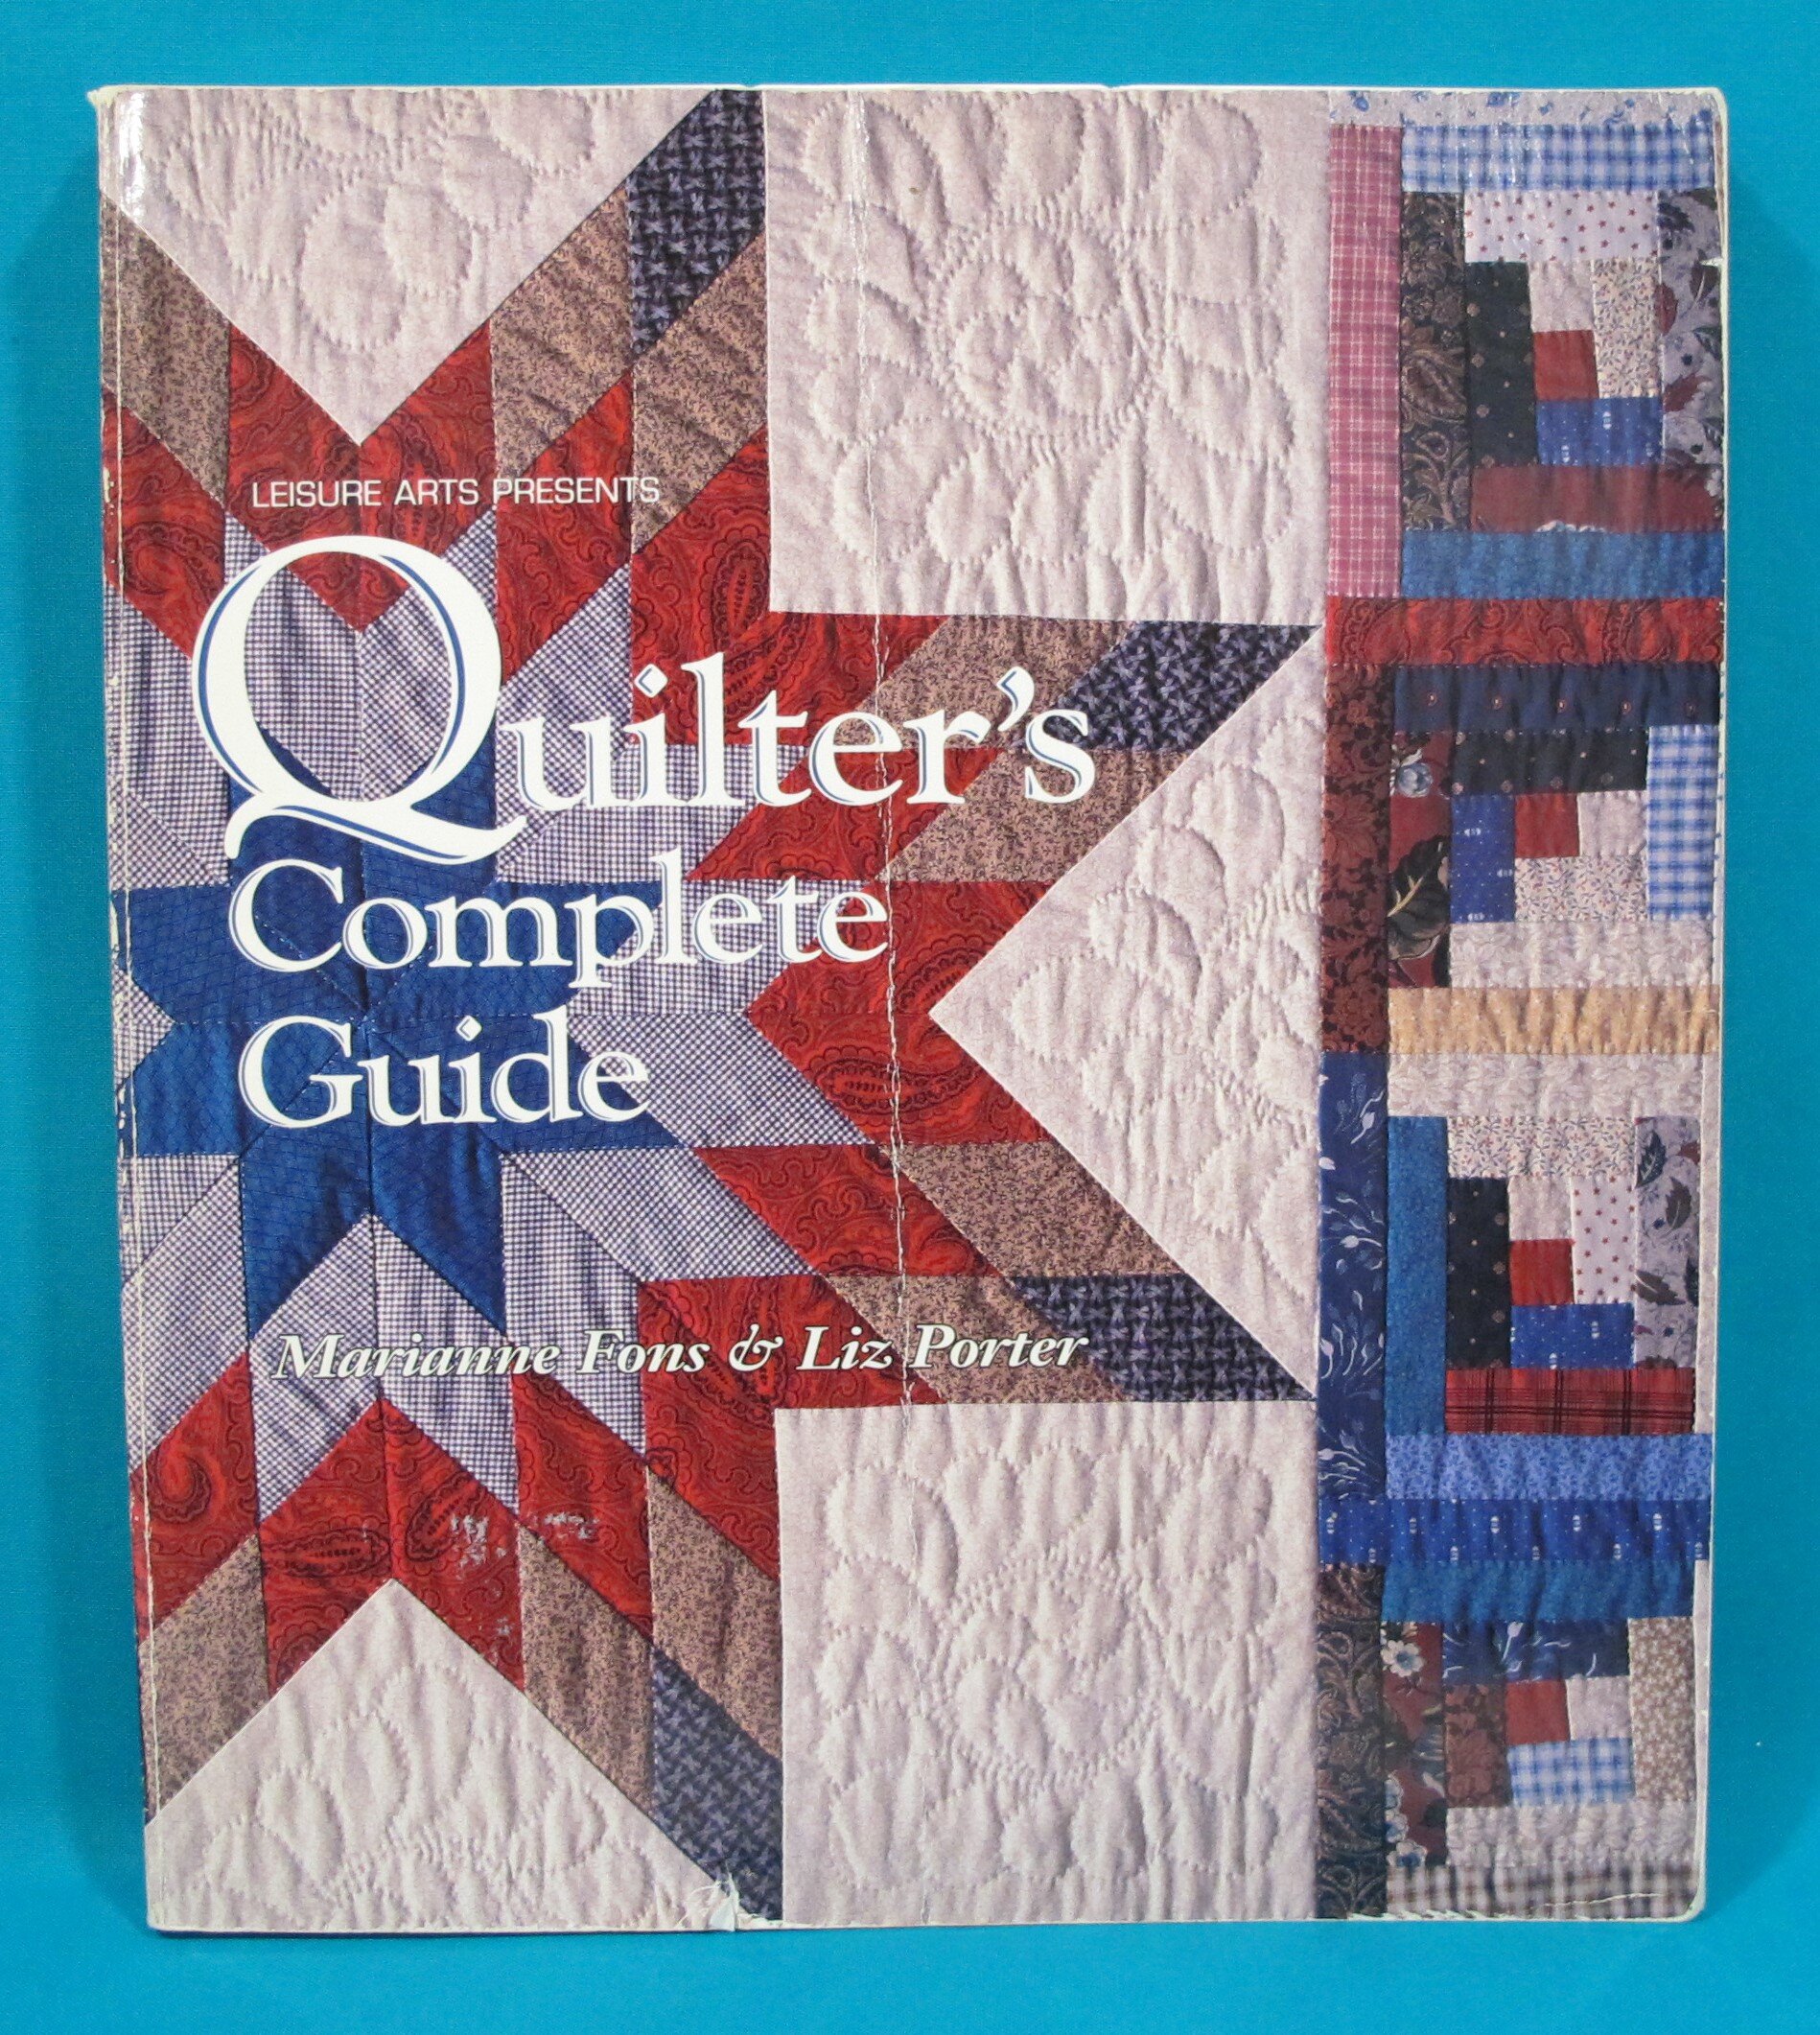 Quilters Complete Guide.JPG